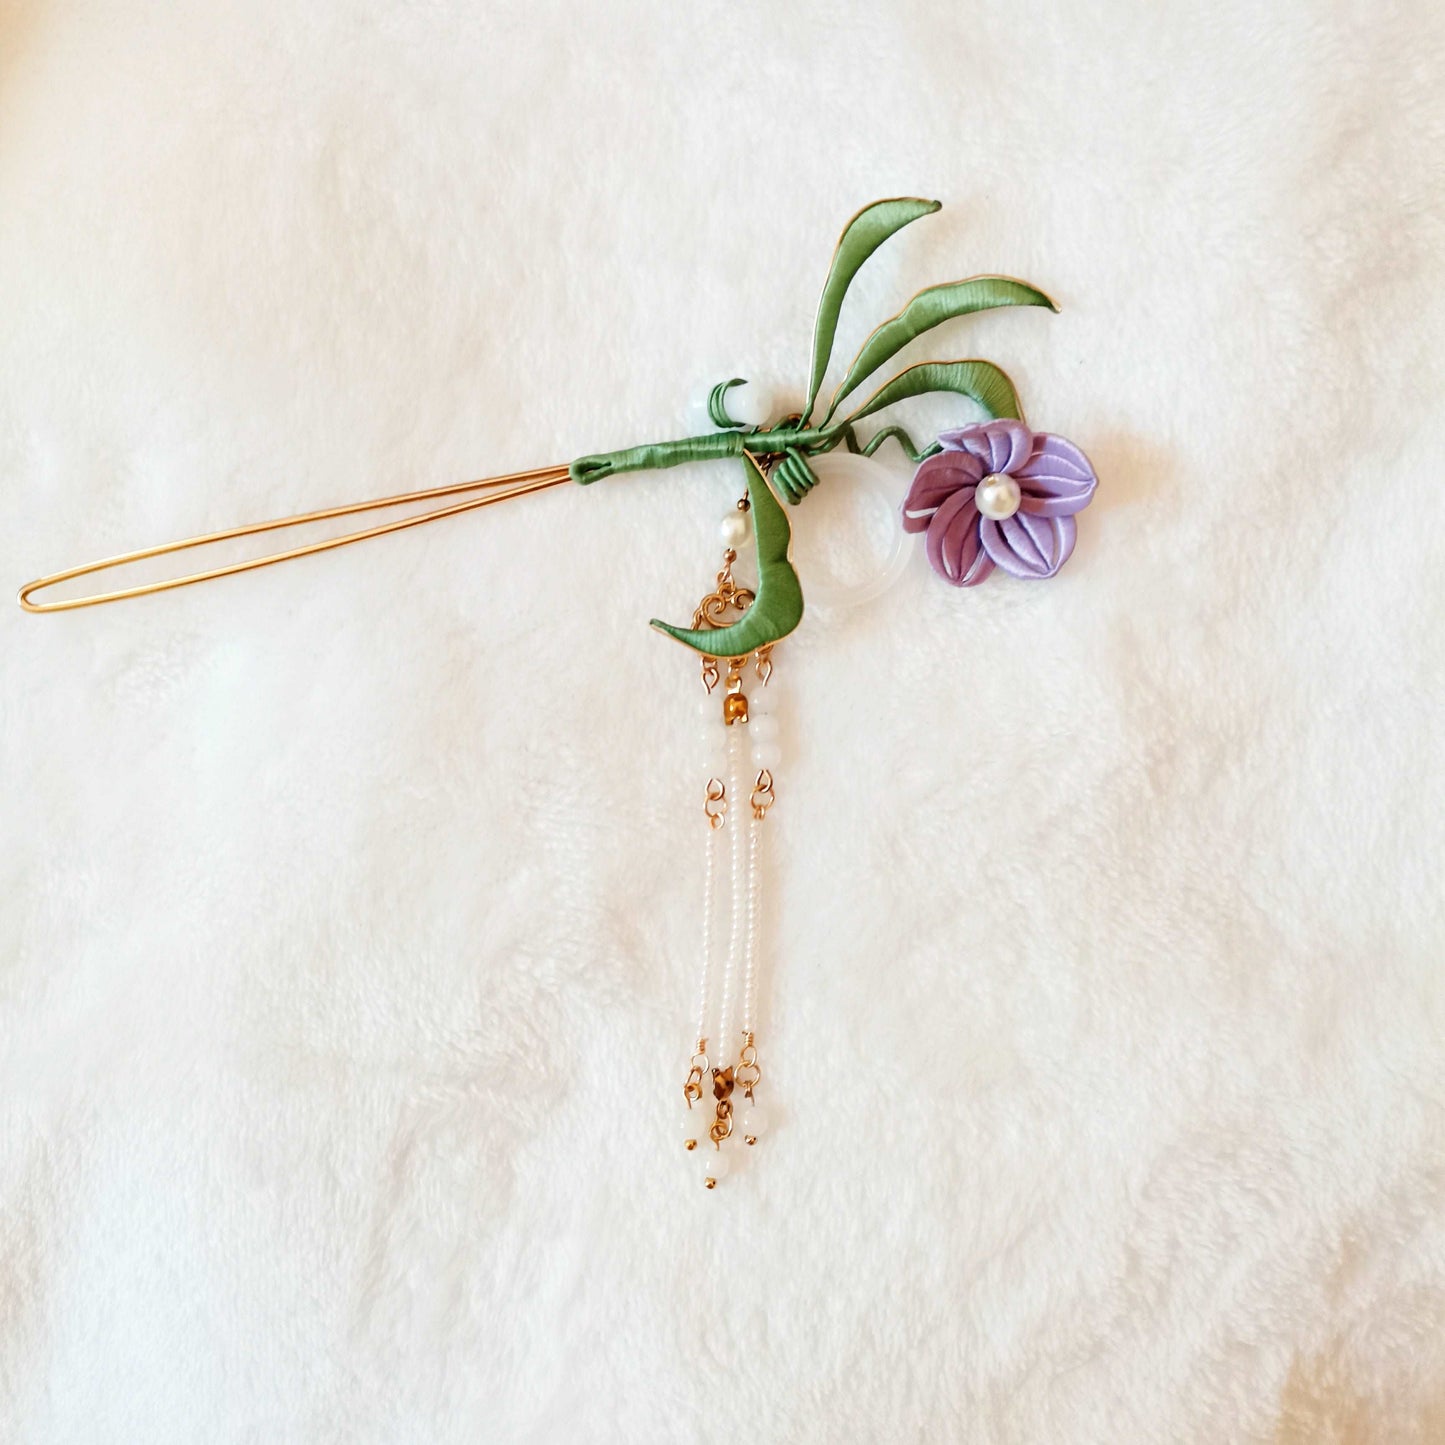 Handmade Hairpins for Bridal Hairstyles That Add a Touch of Glamour